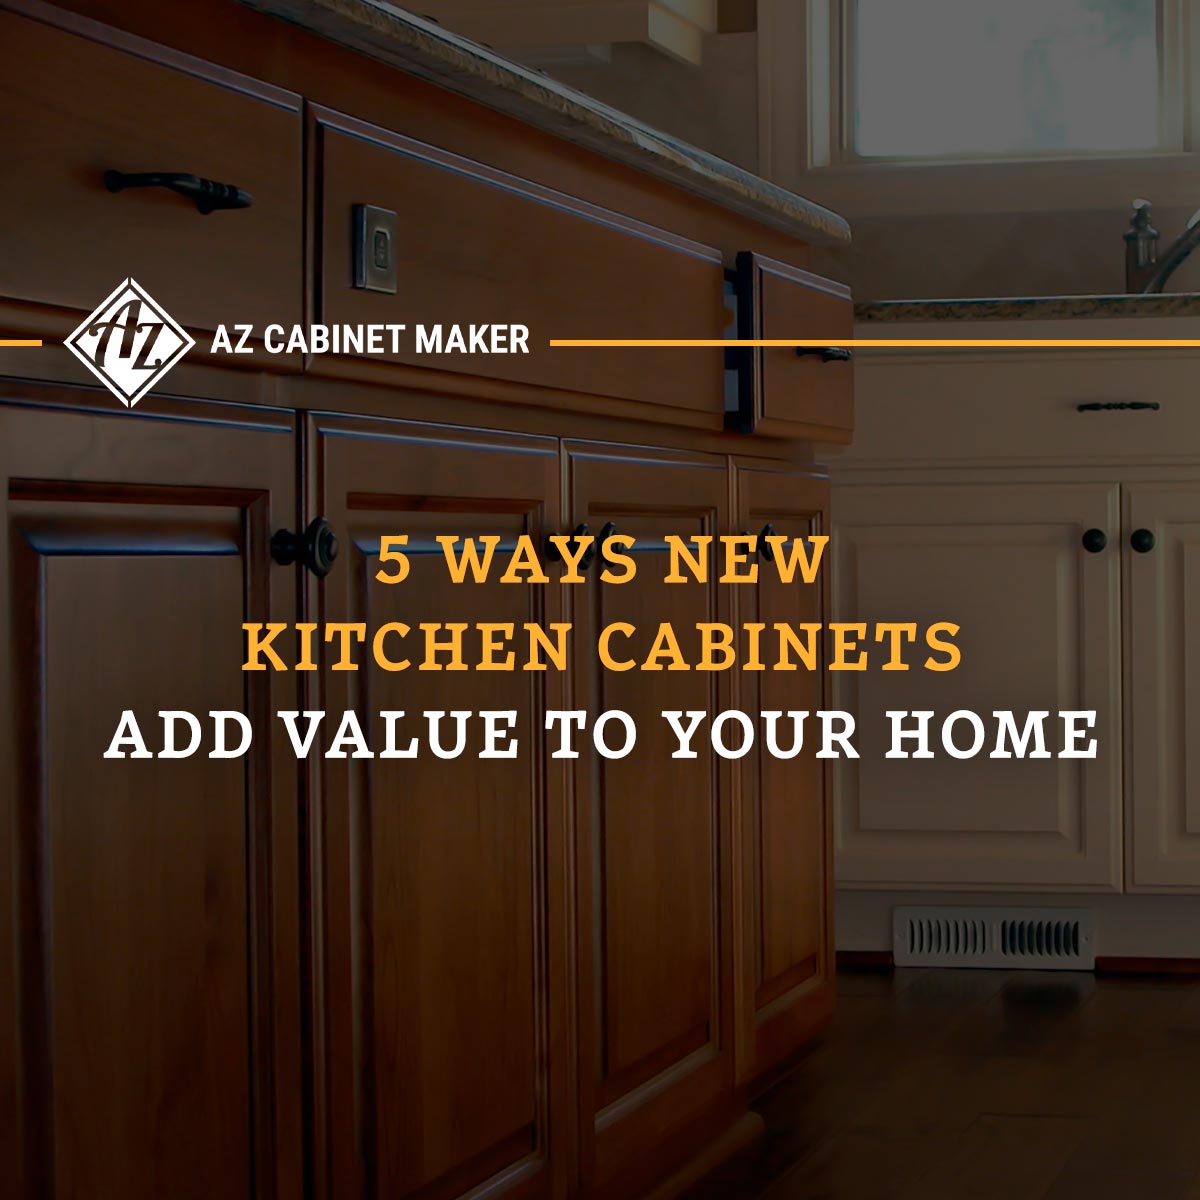 5 Ways New Kitchen Cabinets Add Value To Your Home blog featured image https://azcabinetmaker.com/